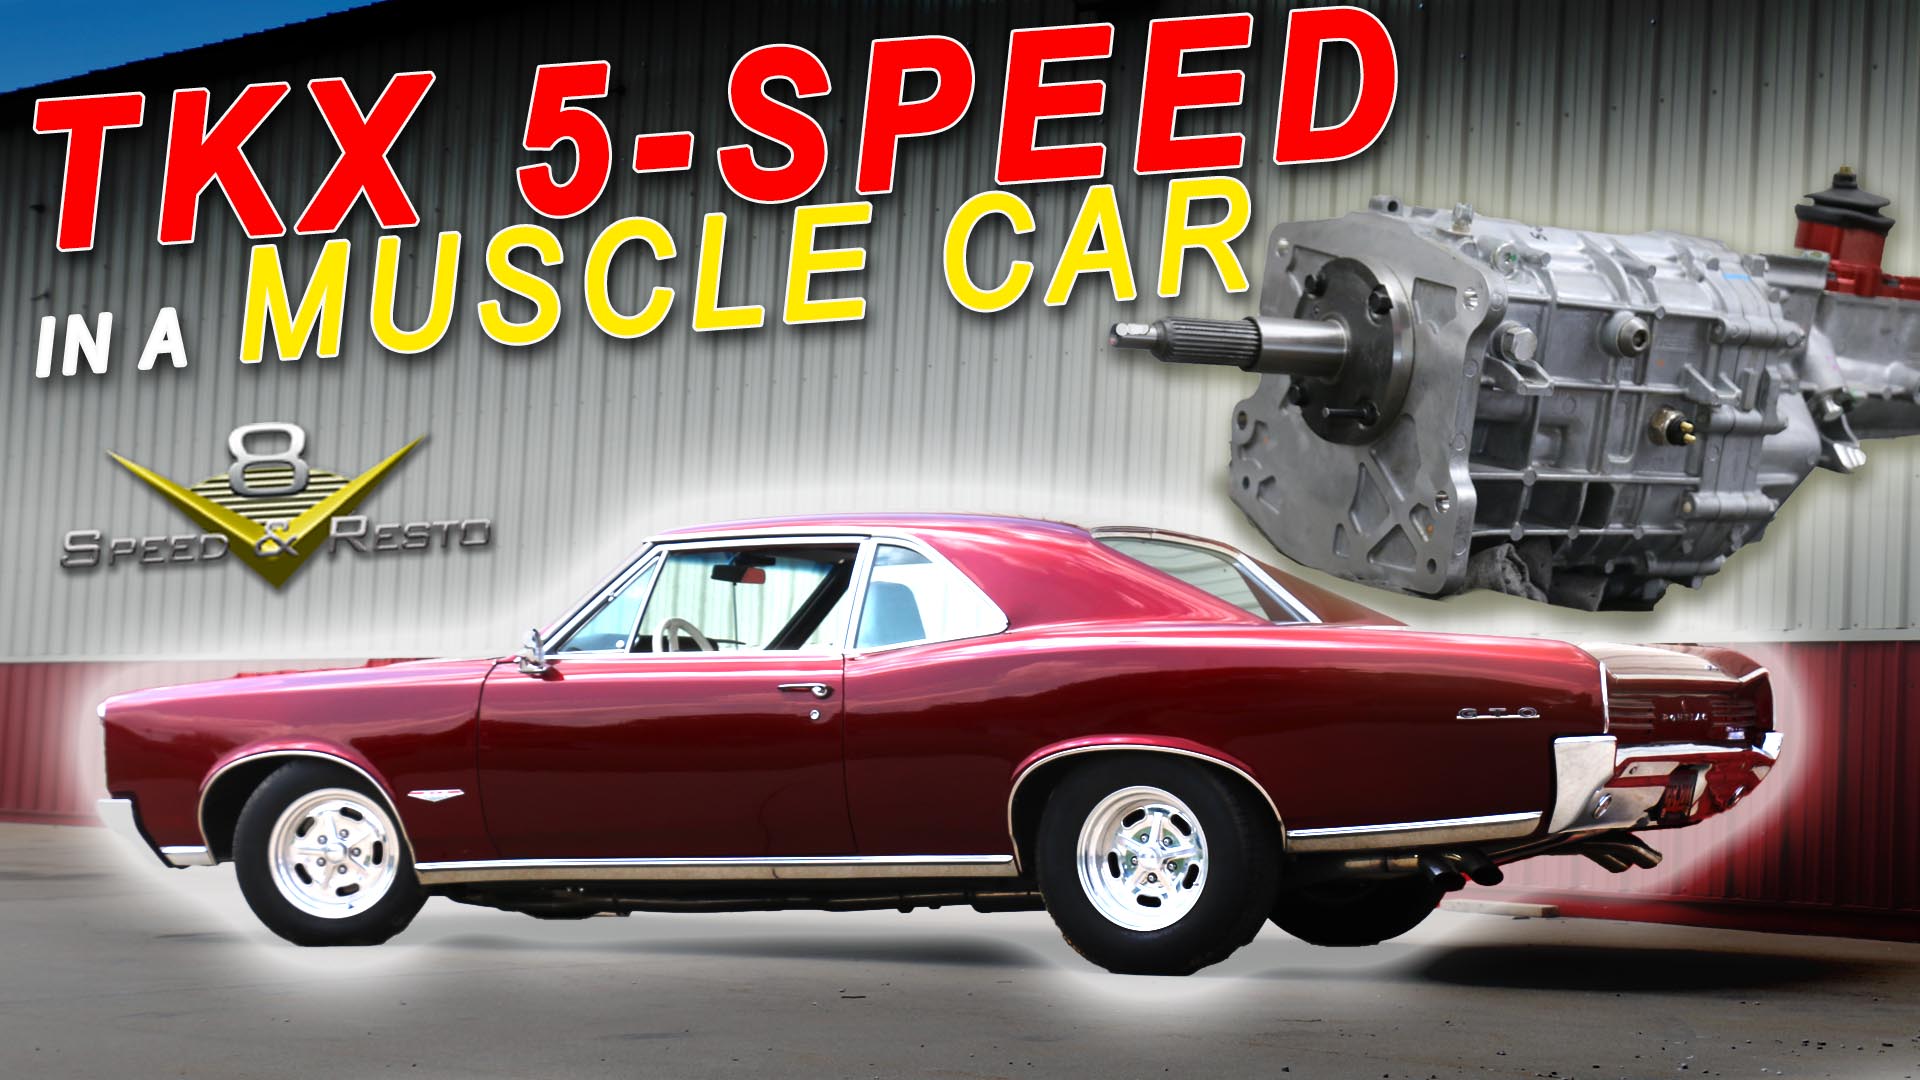 We install Tremec TKX 5-Speed Manual Transmissions in Muscle Cars at the V8 Speed and Resto Shop